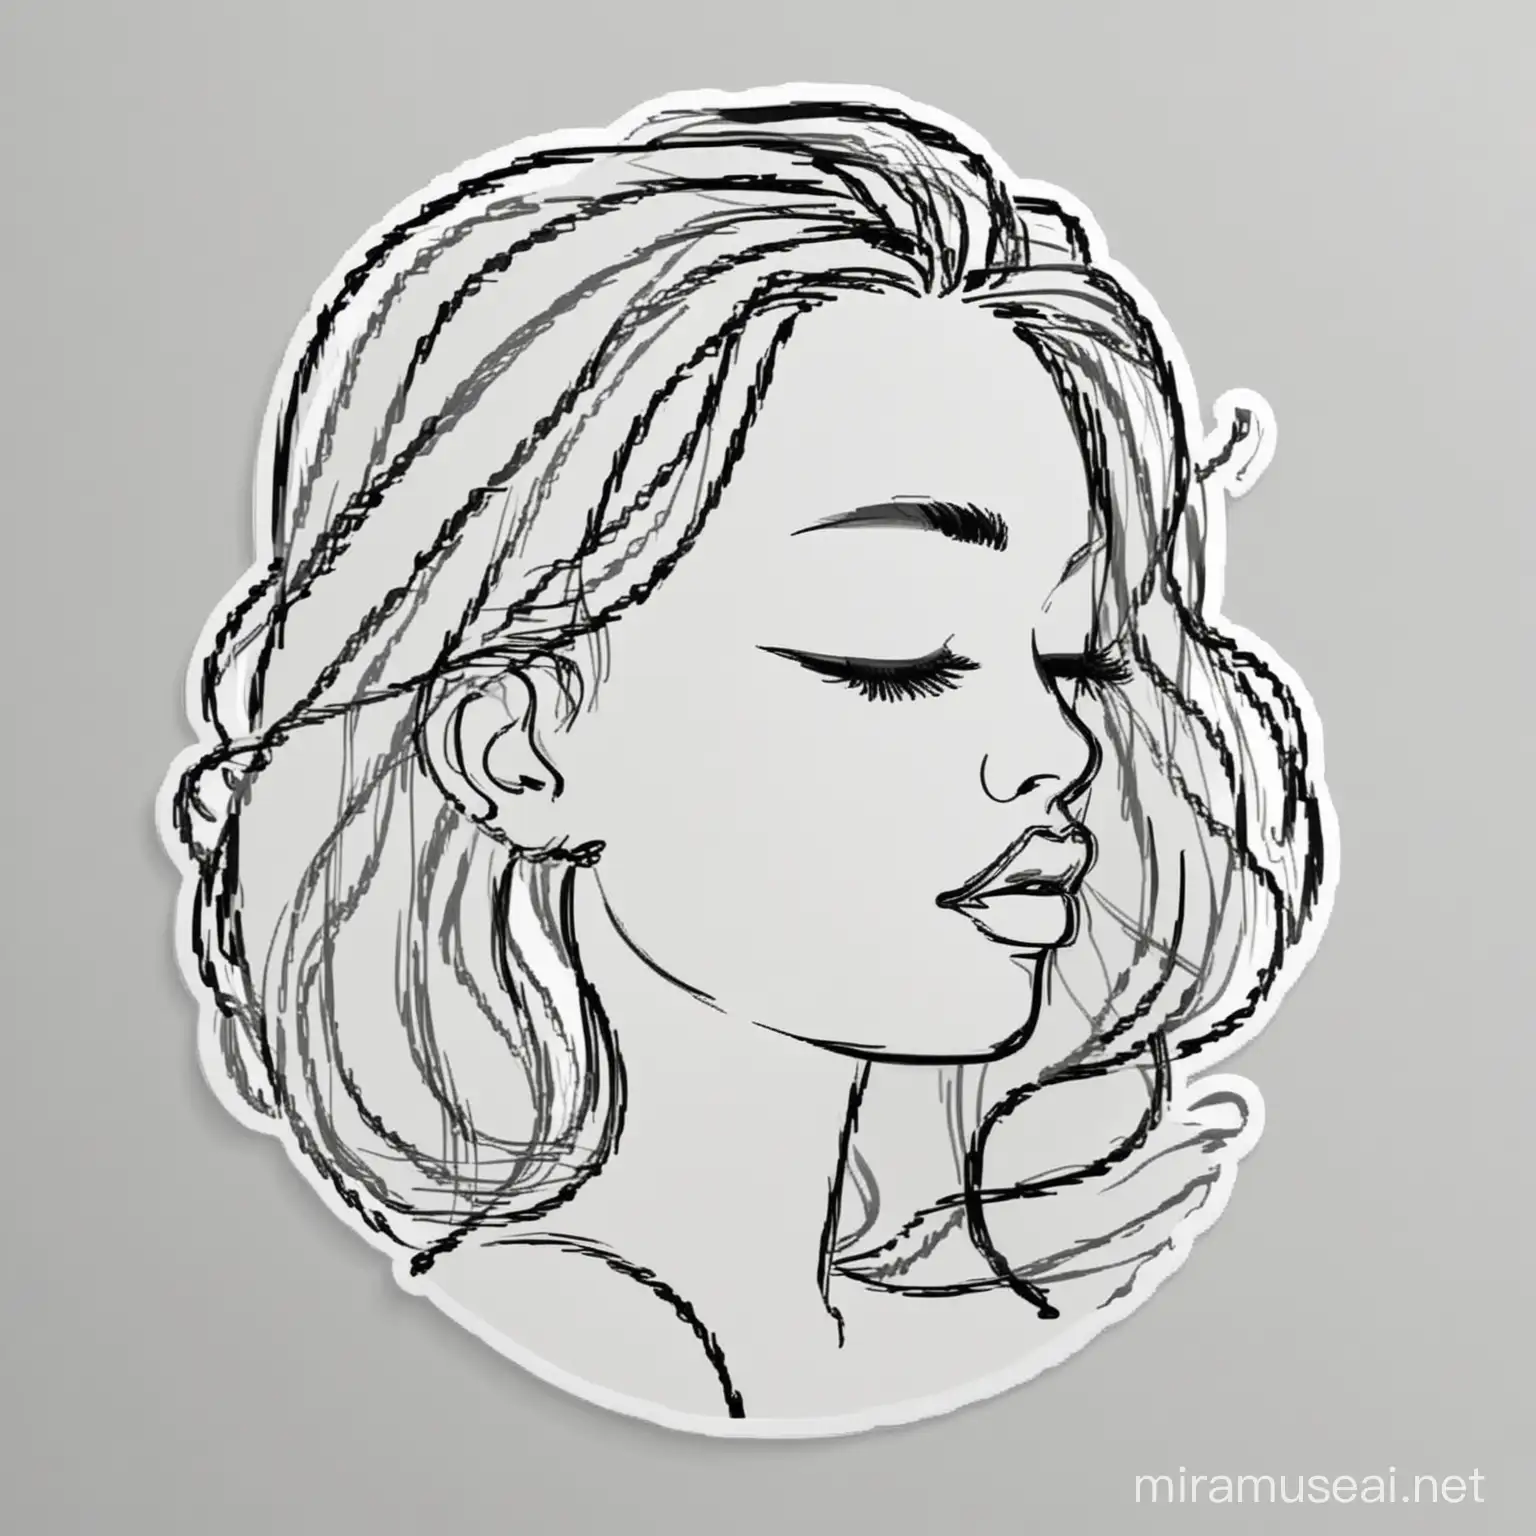 Line Art Lady: Black & White Woman (One Line). Minimalist Vector Sticker. Tertiary Color Pop., cosmetics brand, born 16, 2d, vector, line drawing, luxury, White Background
